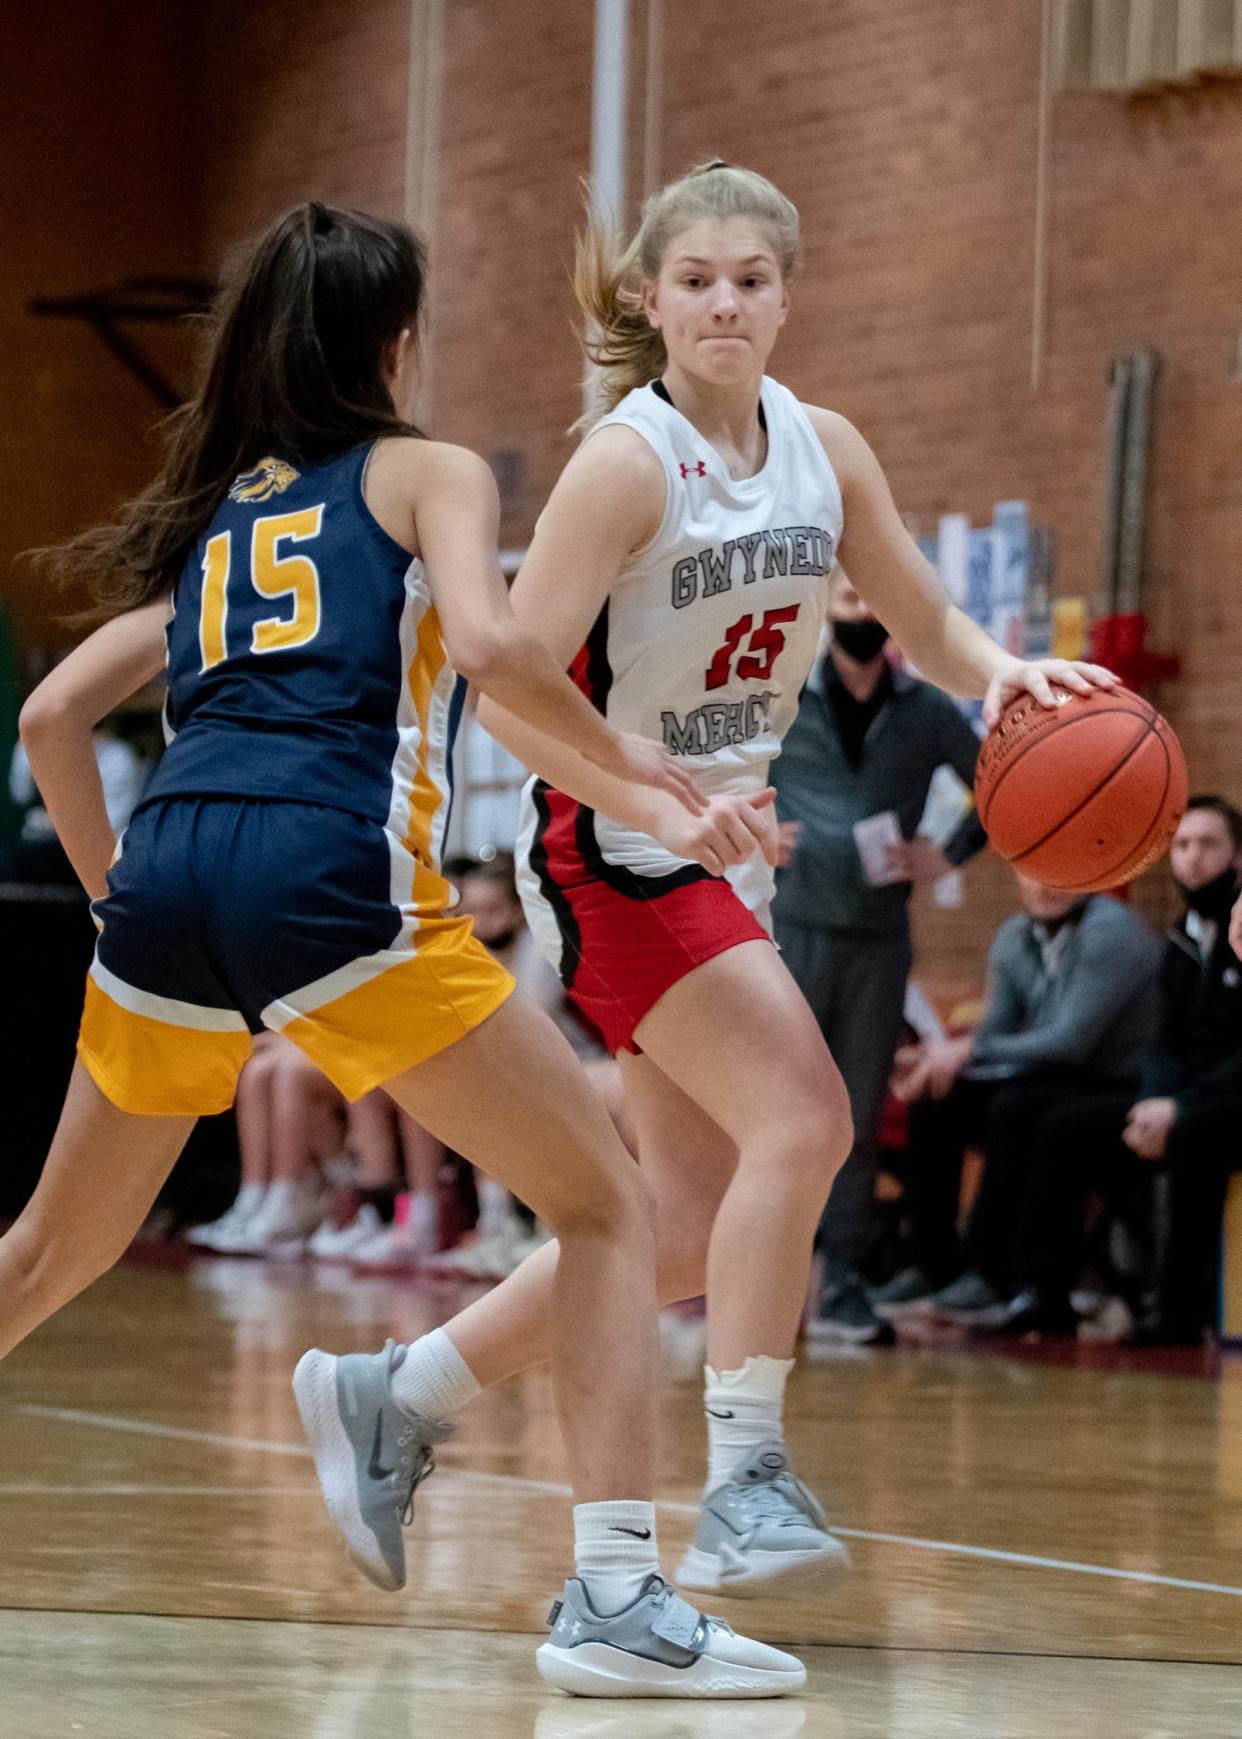 Gwynedd Mercy's Hannah Griffin dribbles while guarded by New Hope-Solebury's Izzy Elizondo in Tuesday's District One Class 4A semifinal game.